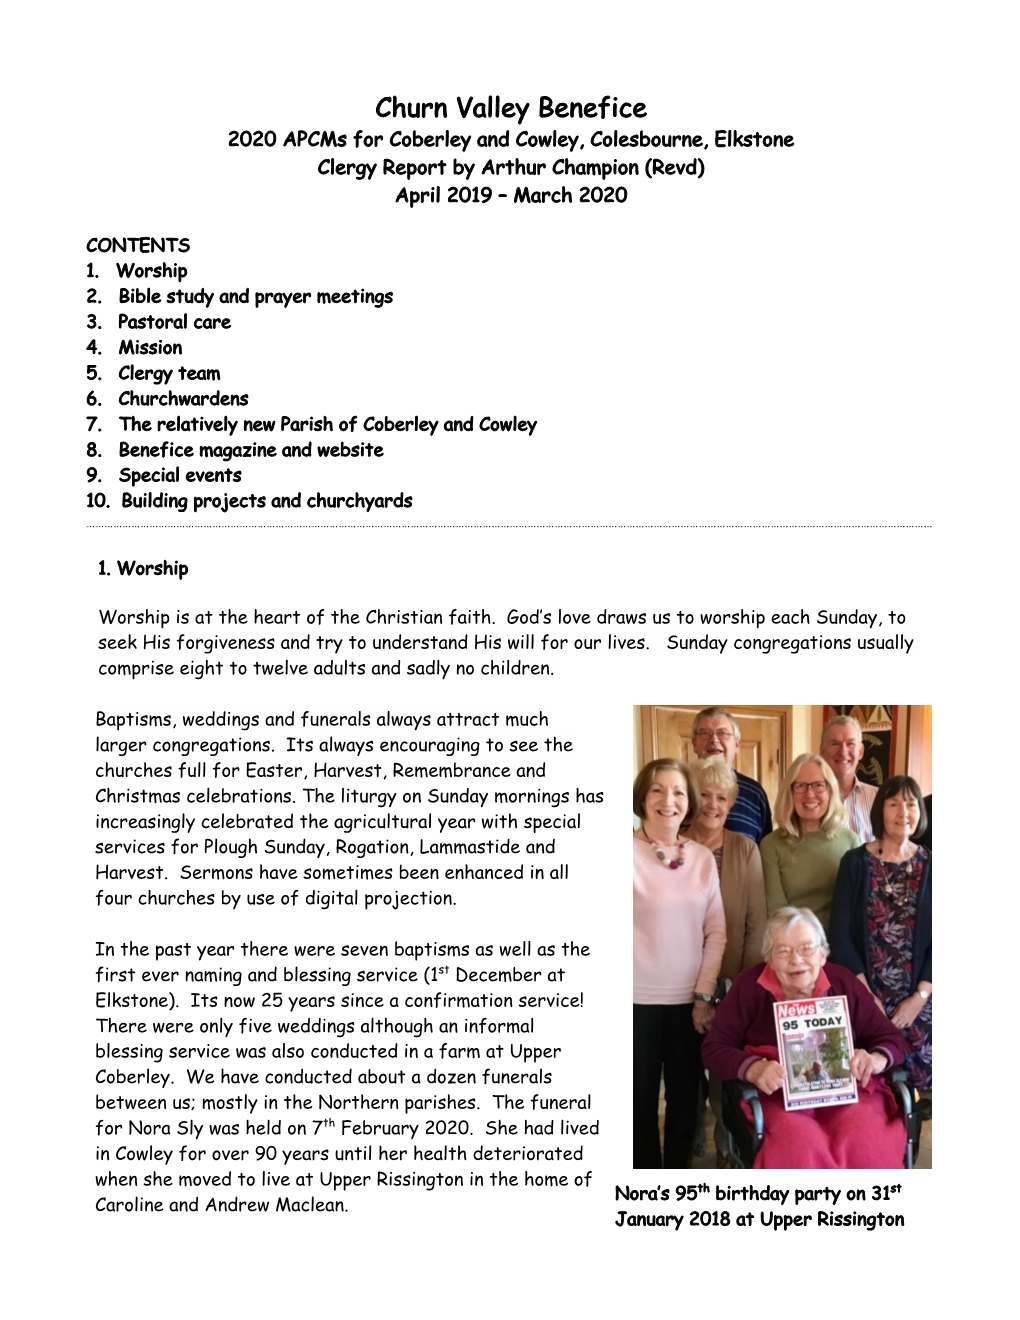 Churn Valley Benefice 2020 Apcms for Coberley and Cowley, Colesbourne, Elkstone Clergy Report by Arthur Champion (Revd) April 2019 – March 2020